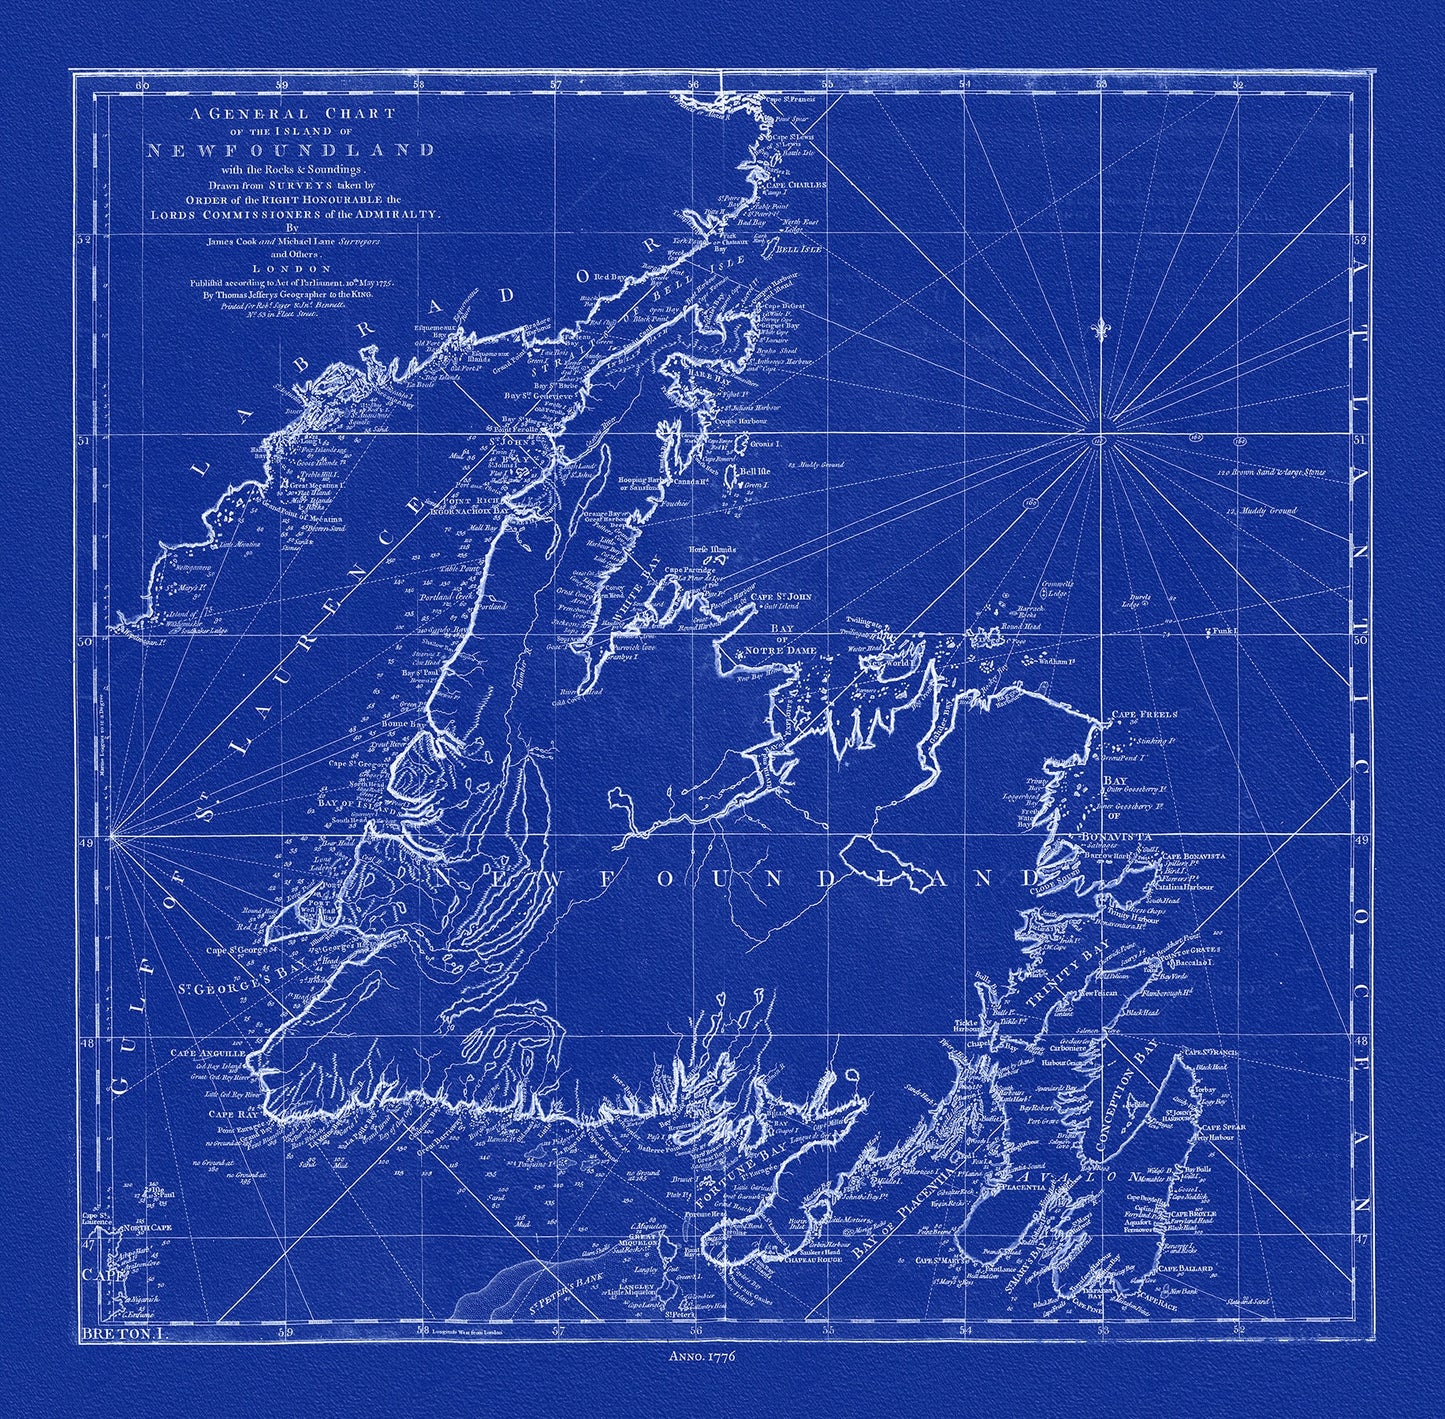 A General Chart Of The Island Of Newfoundland, 1776,Jefferys, auth., Cyanotype, map on durable cotton canvas, 50 x 70 cm, 20 x 25" approx.